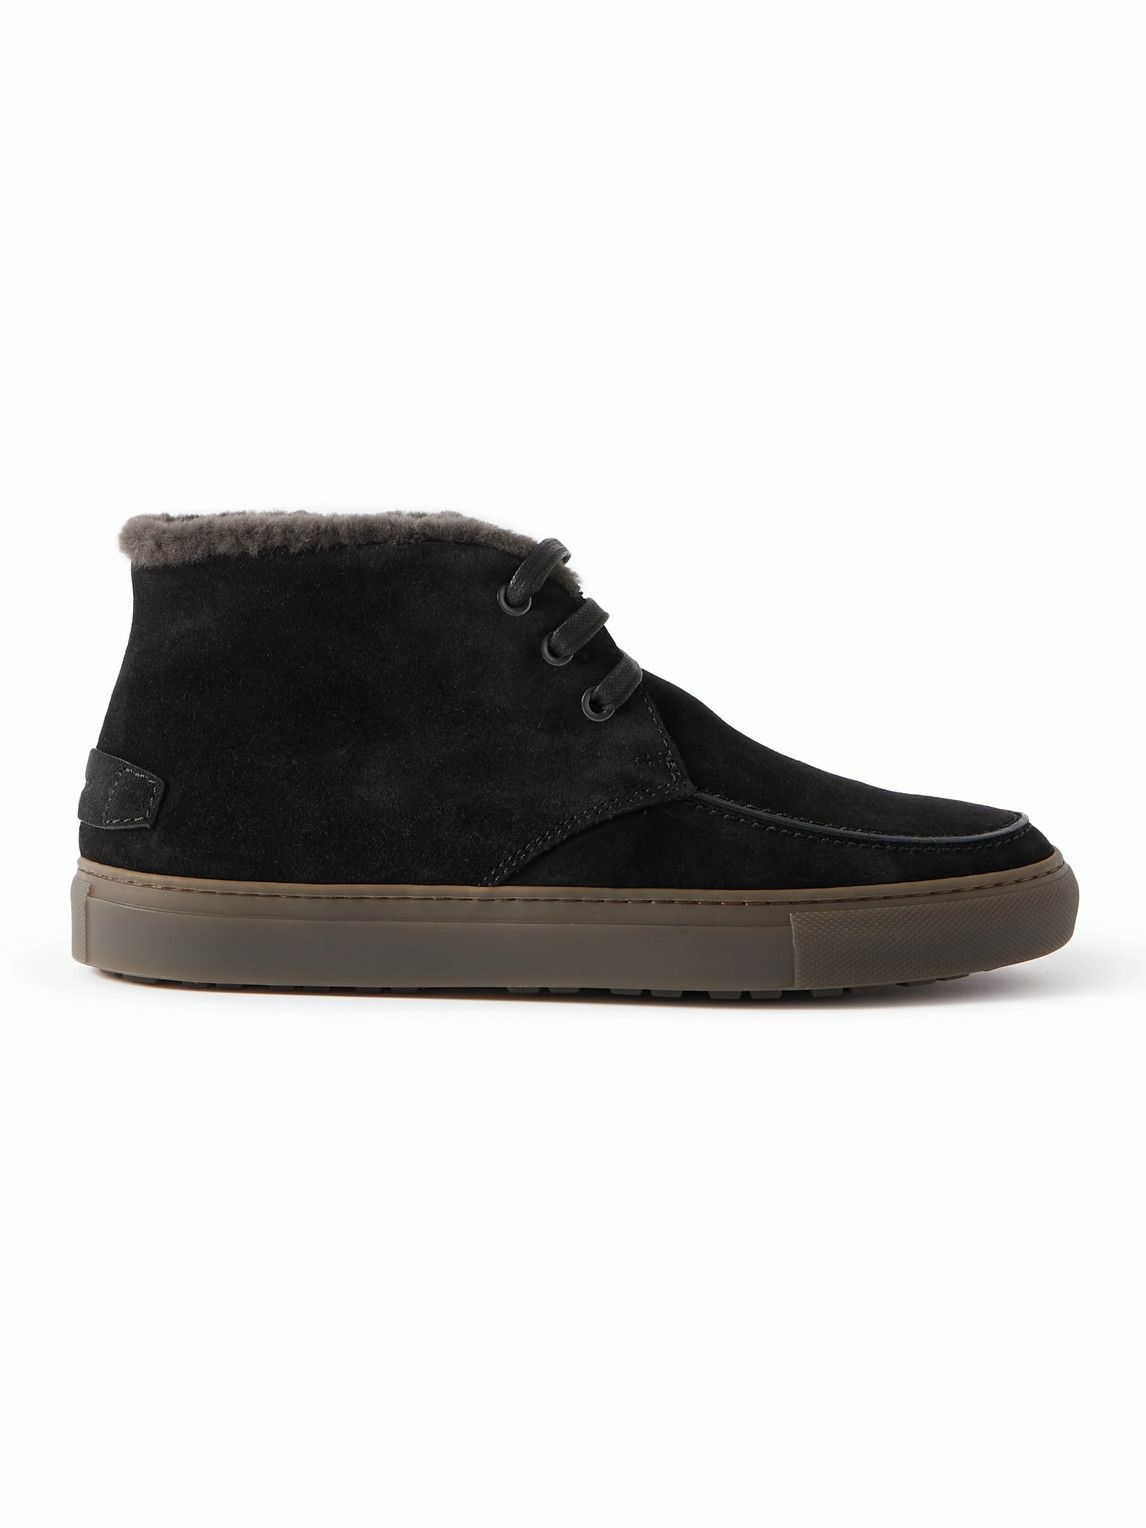 Photo: Brioni - Shearling-Lined Suede Chukka Boots - Black